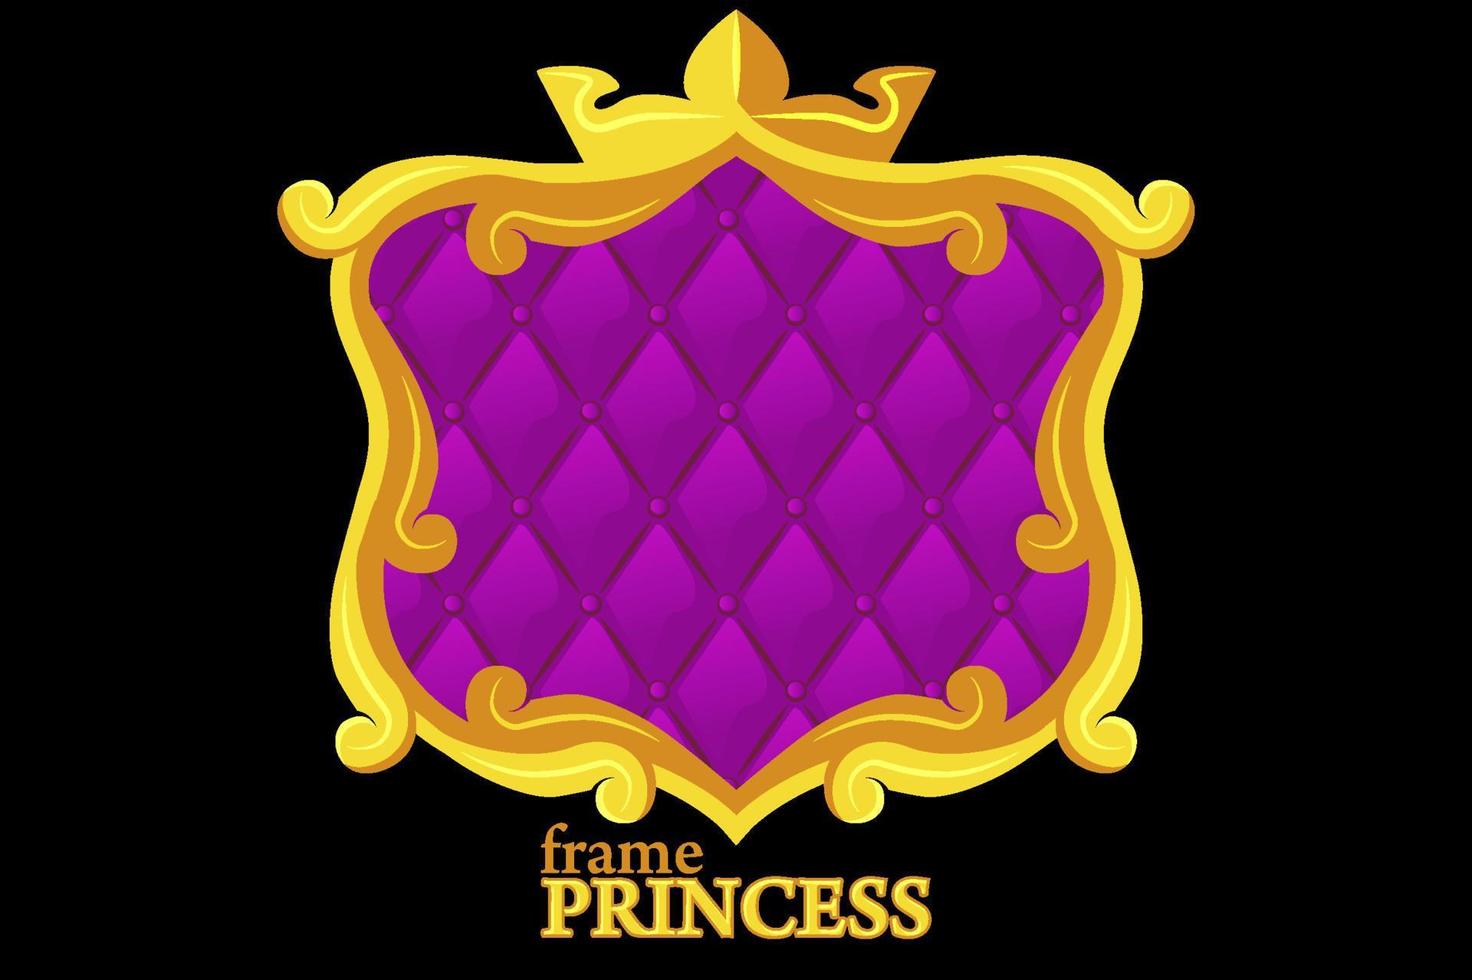 Princess gold frame with geometric upholstery, cartoon square avatars for graphic design. Vector illustration cute royal purple soft fabric templates for games.